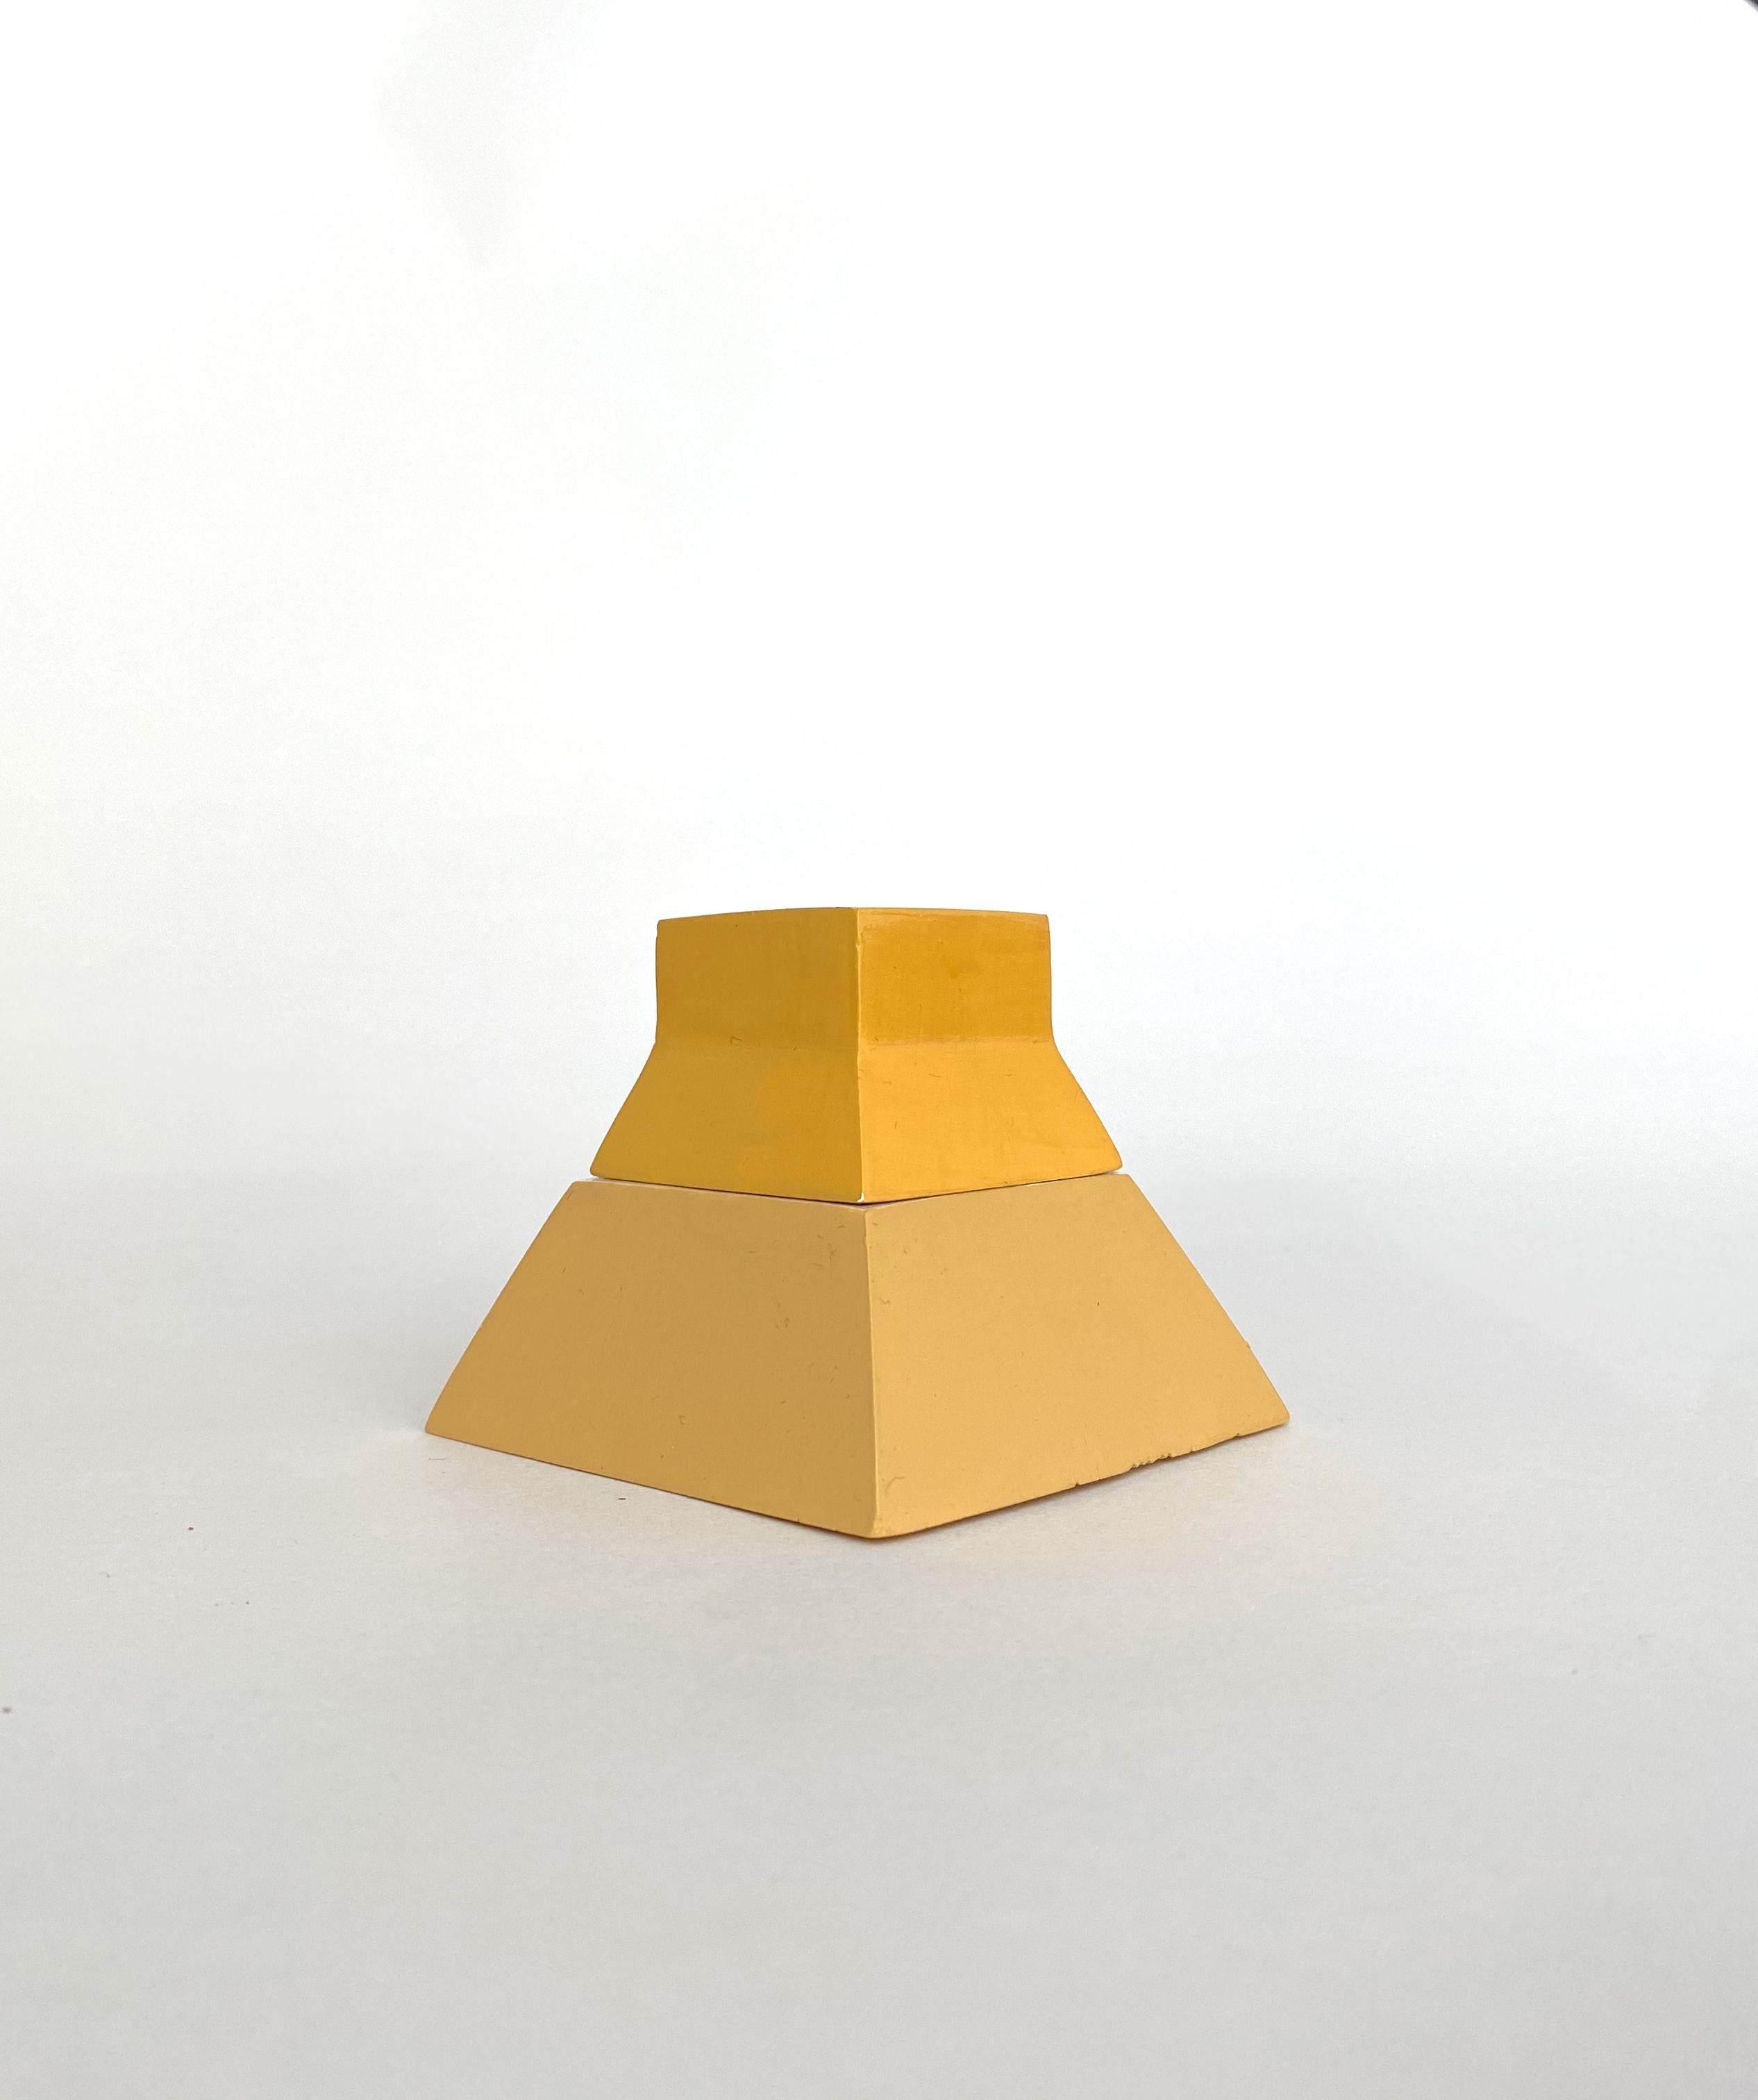 Nomad Jar Laurence Pyramide by Gilles & Cecilie
Unique
Dimensions: H 6 x W 7 cm
Material: Ceramic painted two tone yellow

Gilles and Cecilie Studio created the Nomad Jar Family to explore drawing in three dimensions. The series of objects that